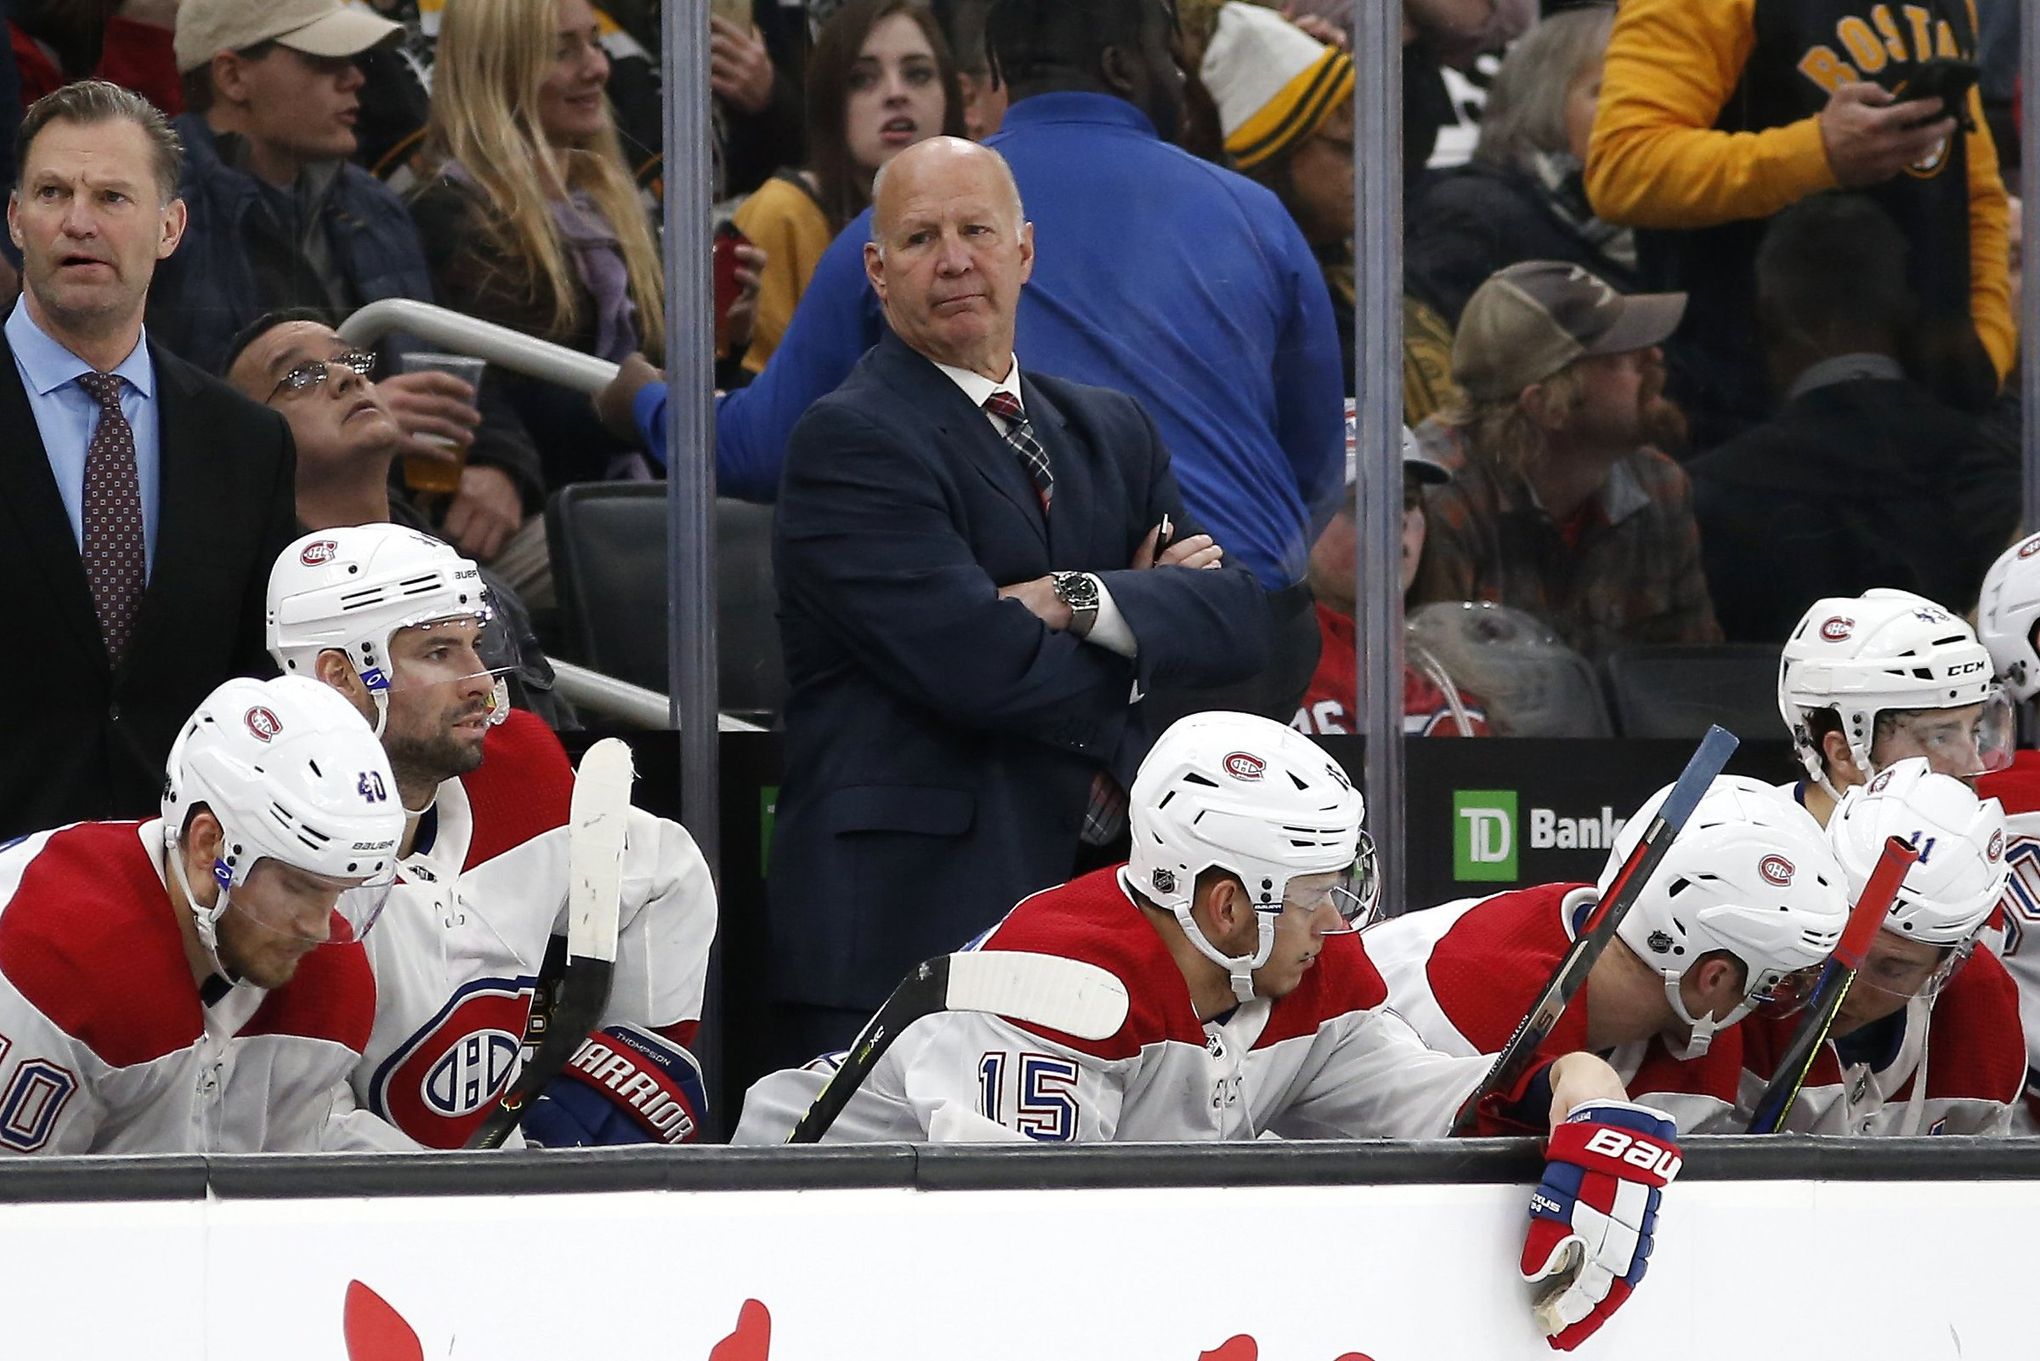 Doctor, what's wrong with me? Seems you're a Montreal Canadiens